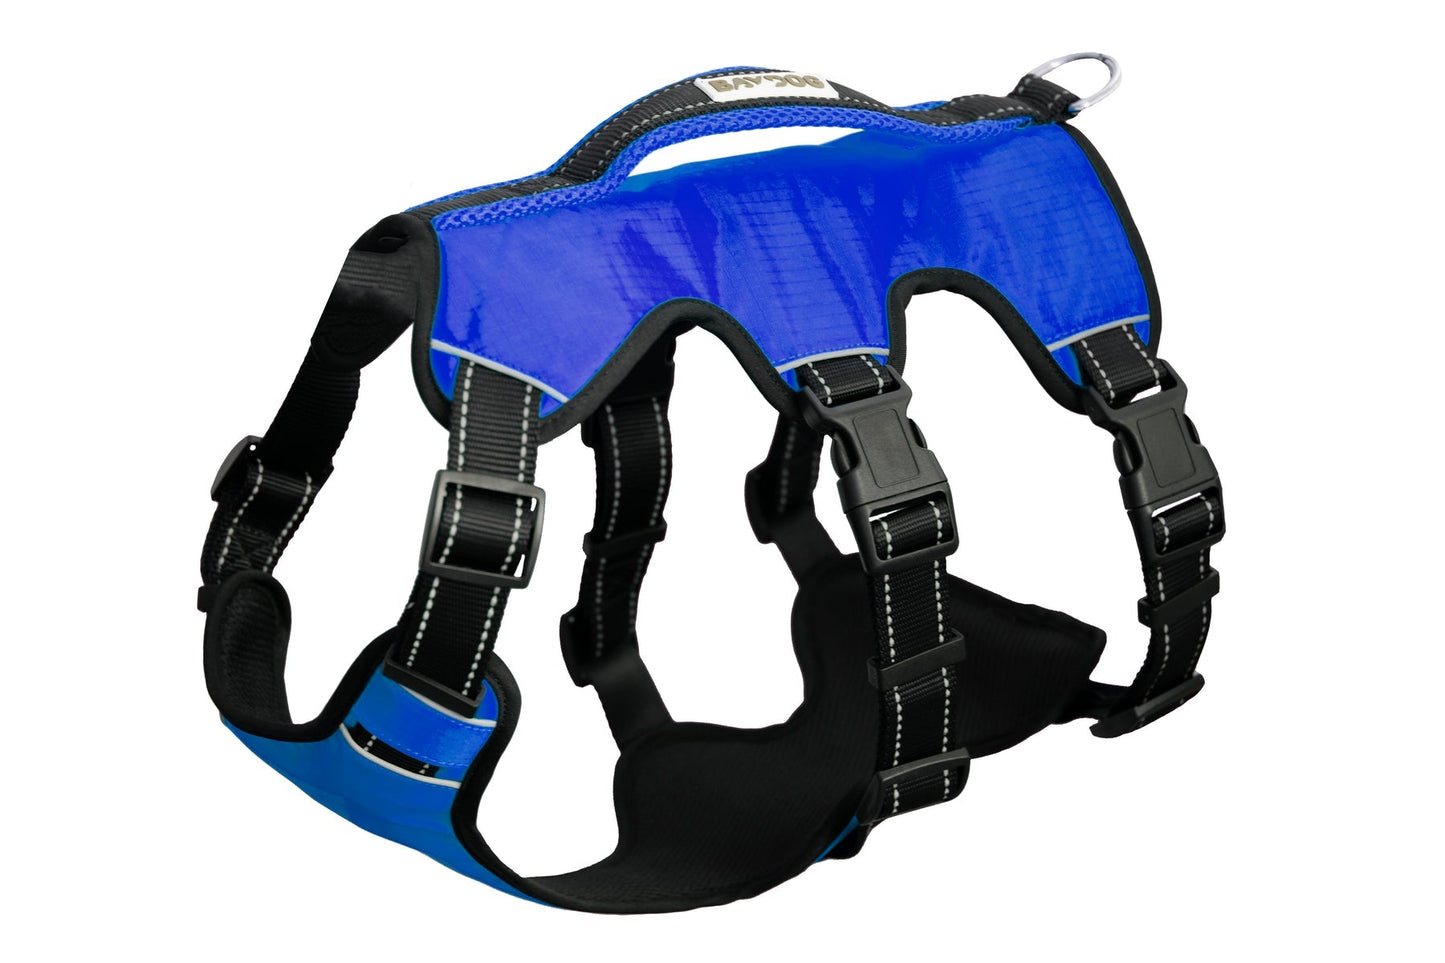 Baydog Galveston Bay Dog Harness with 3 Sets of Straps for Large Dogs